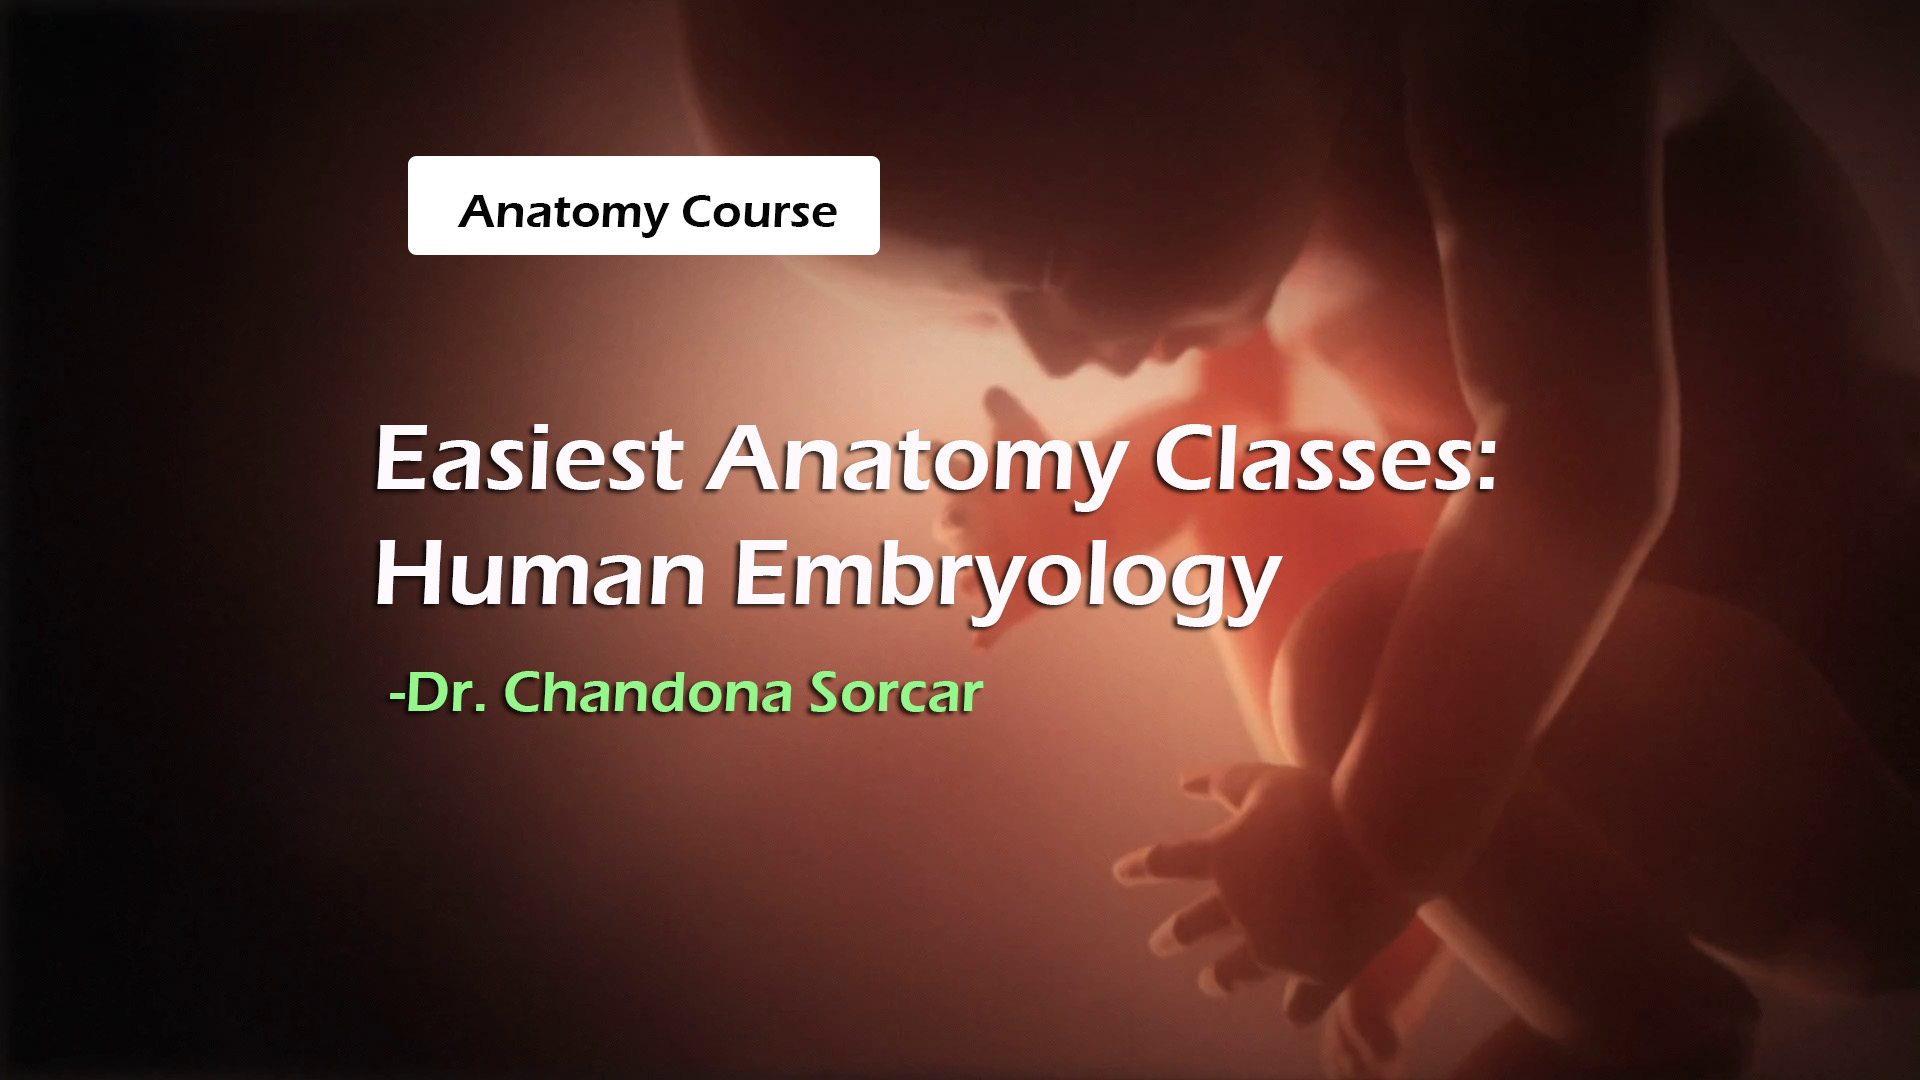 Easiest Anatomy Classes: Human Embryology